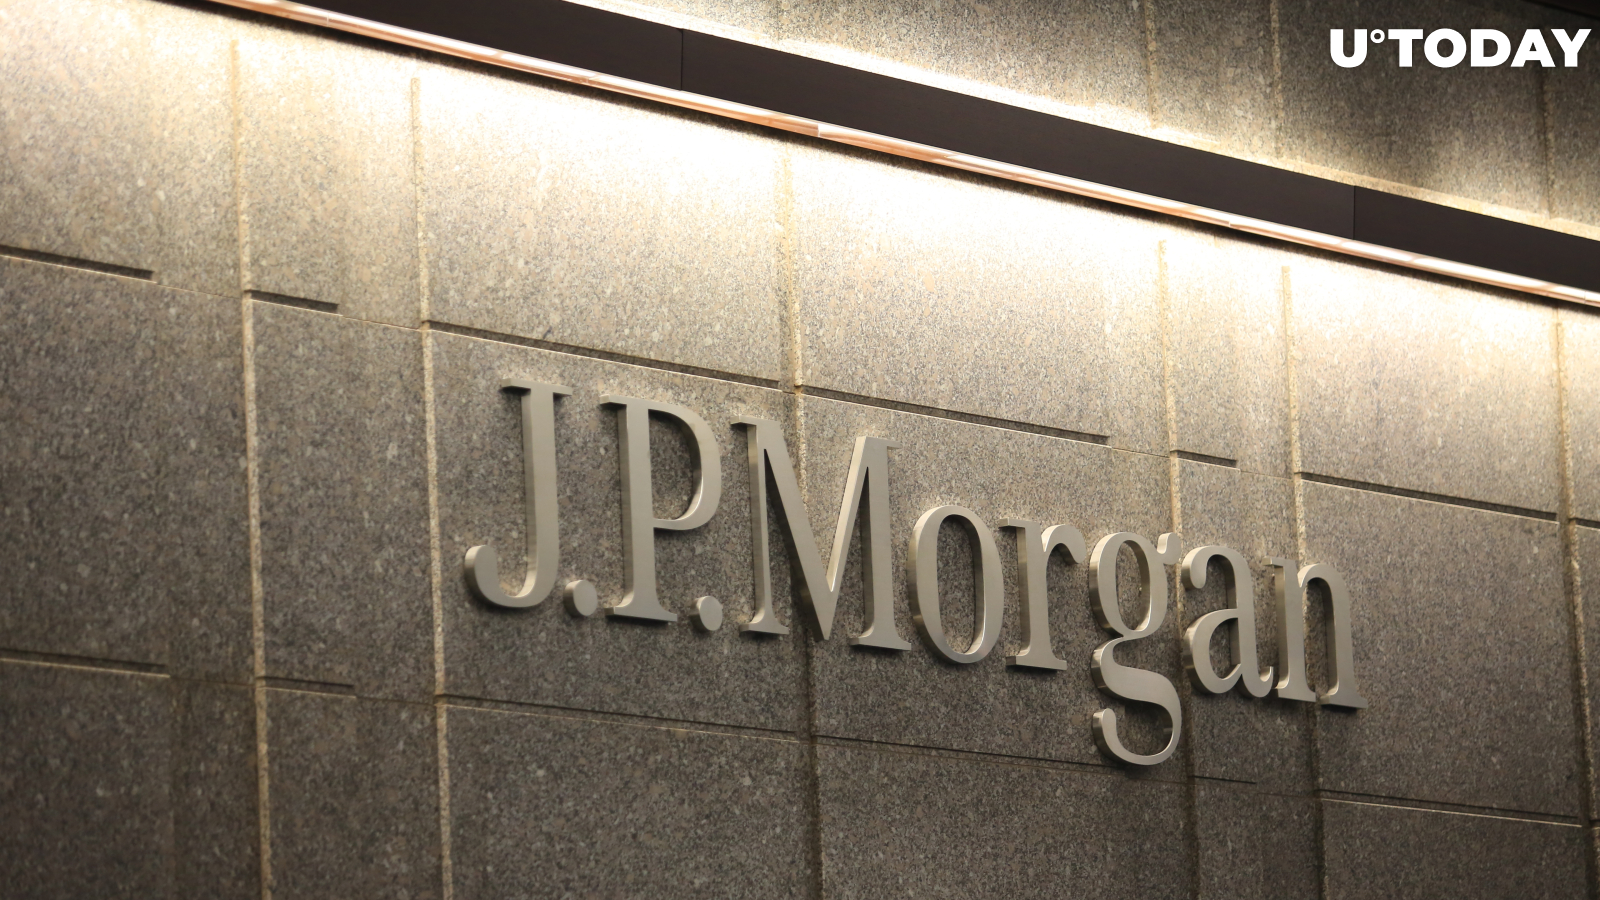 JPMorgan to Follow Client Demand When It Comes to Crypto